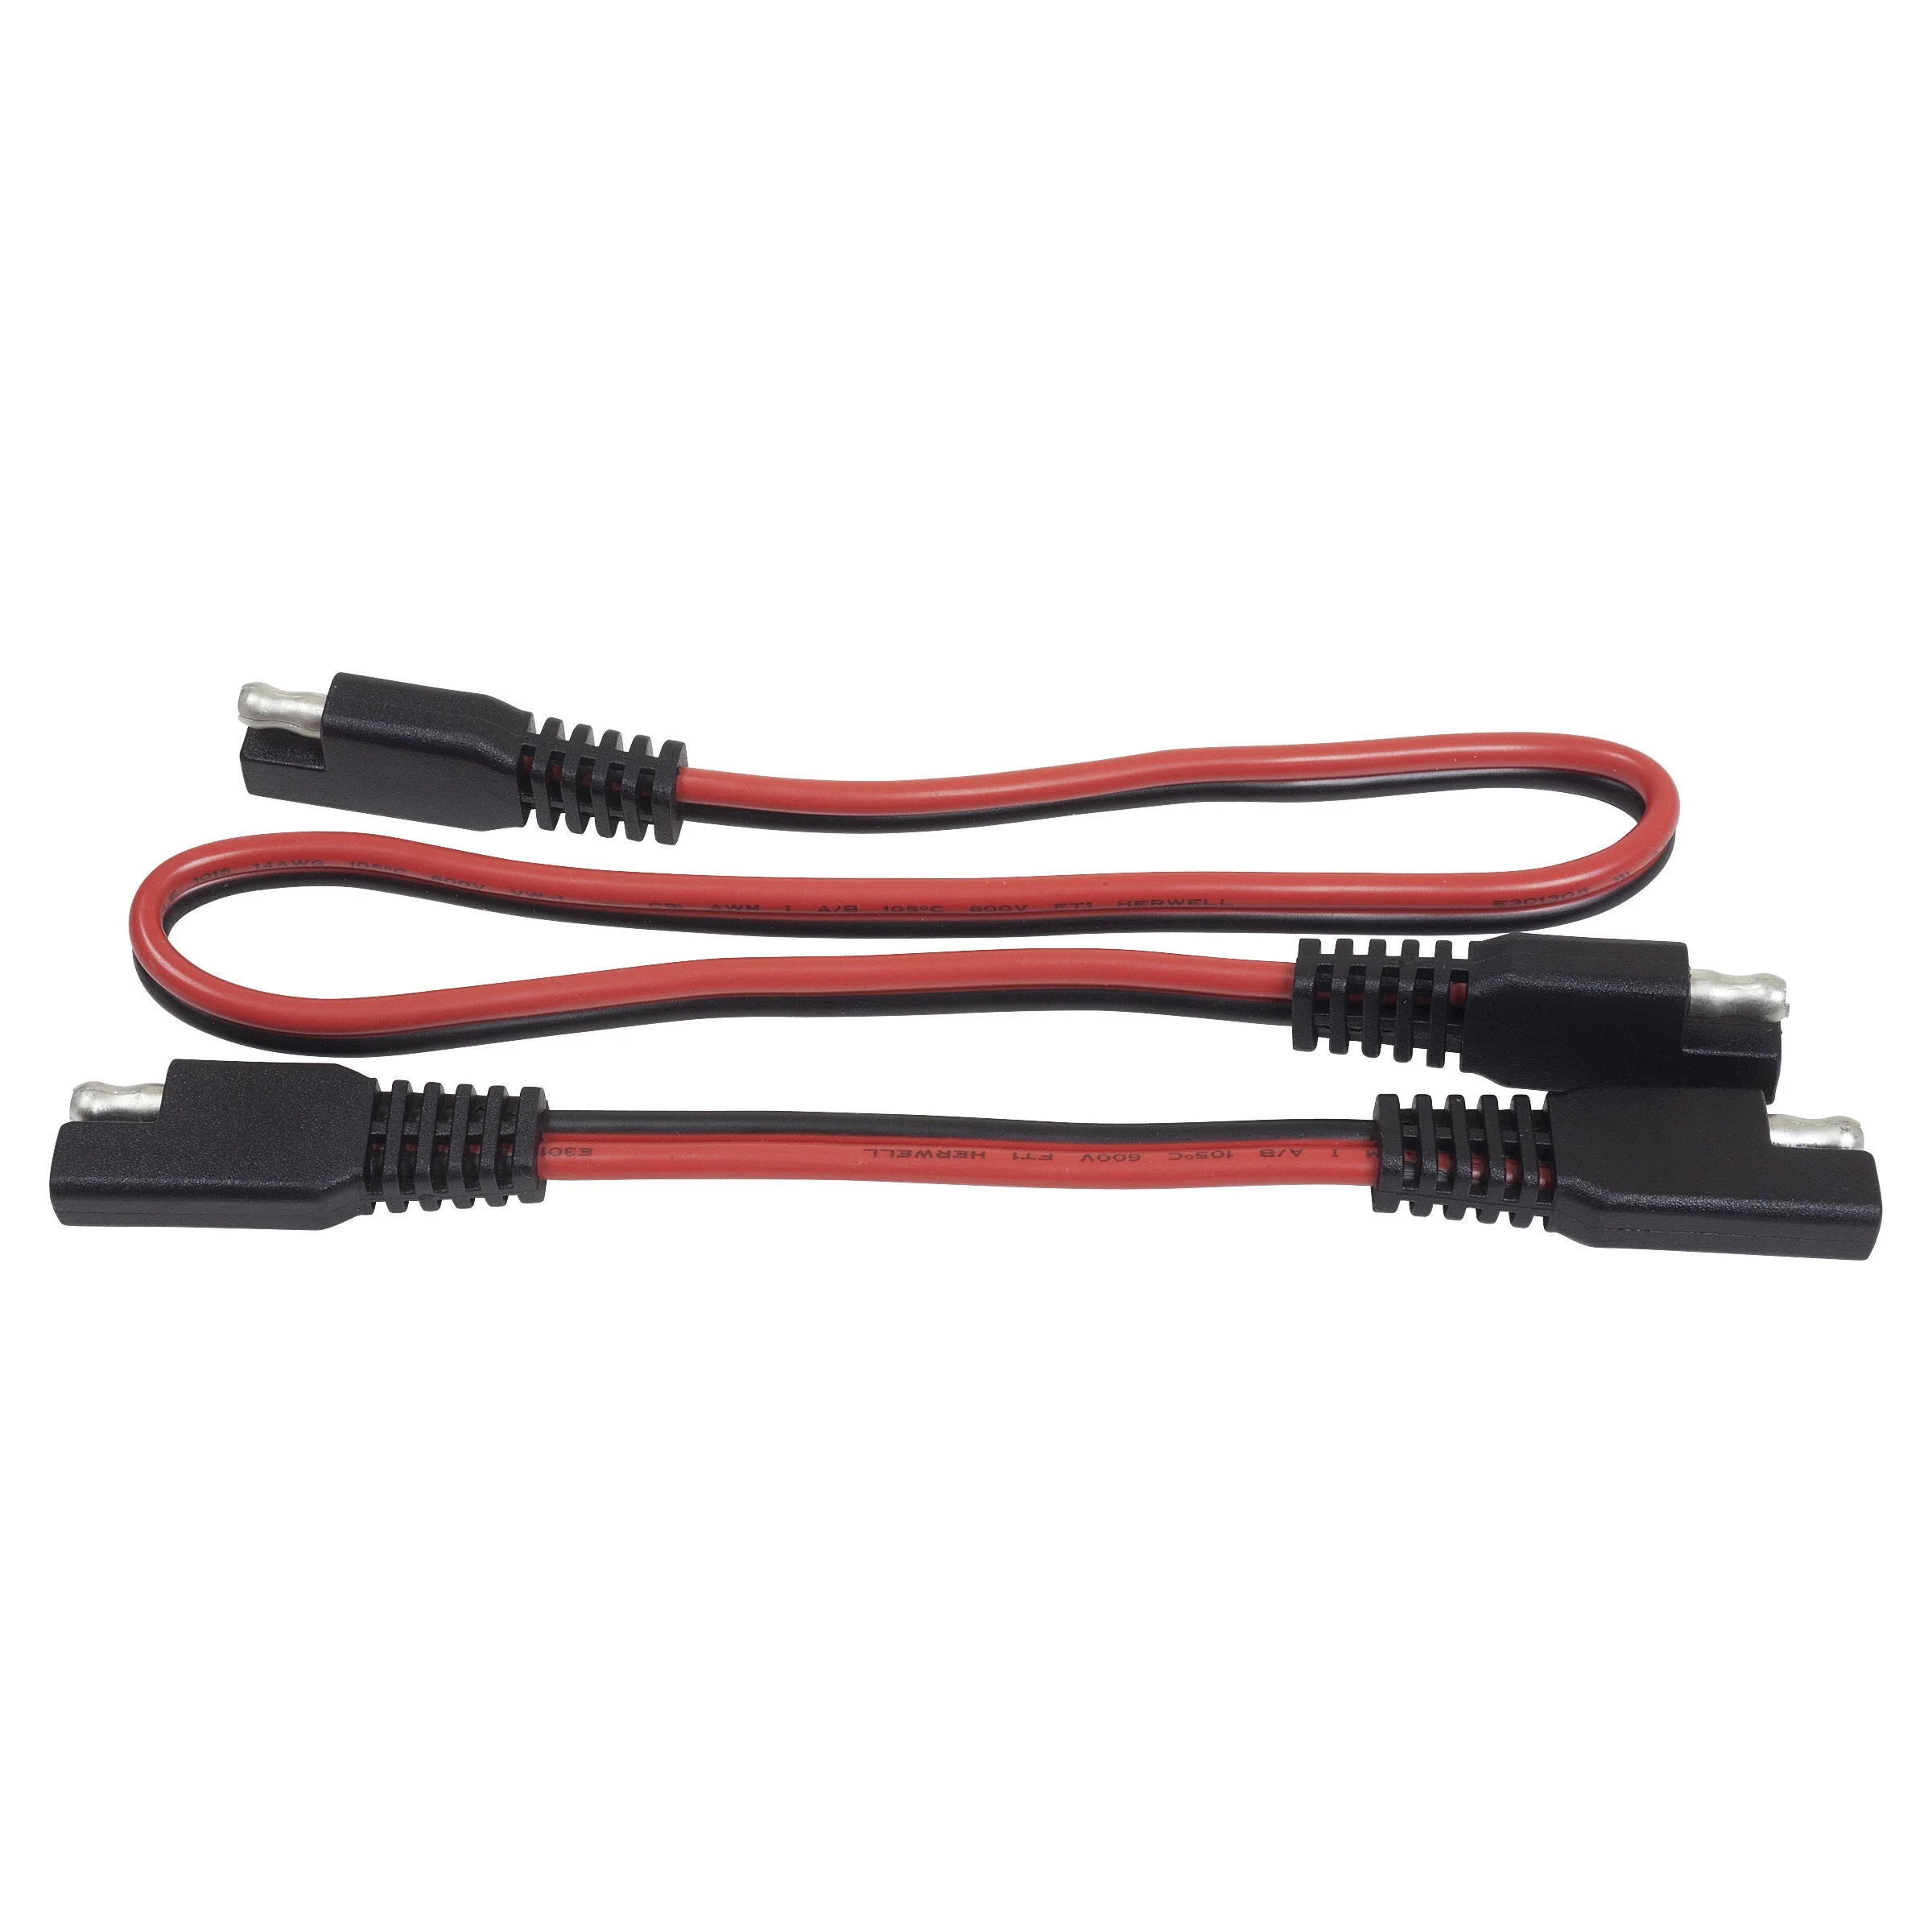 How long are the two cables in the Yak-Power YP-BBK-PAK Power Adapter Kit?